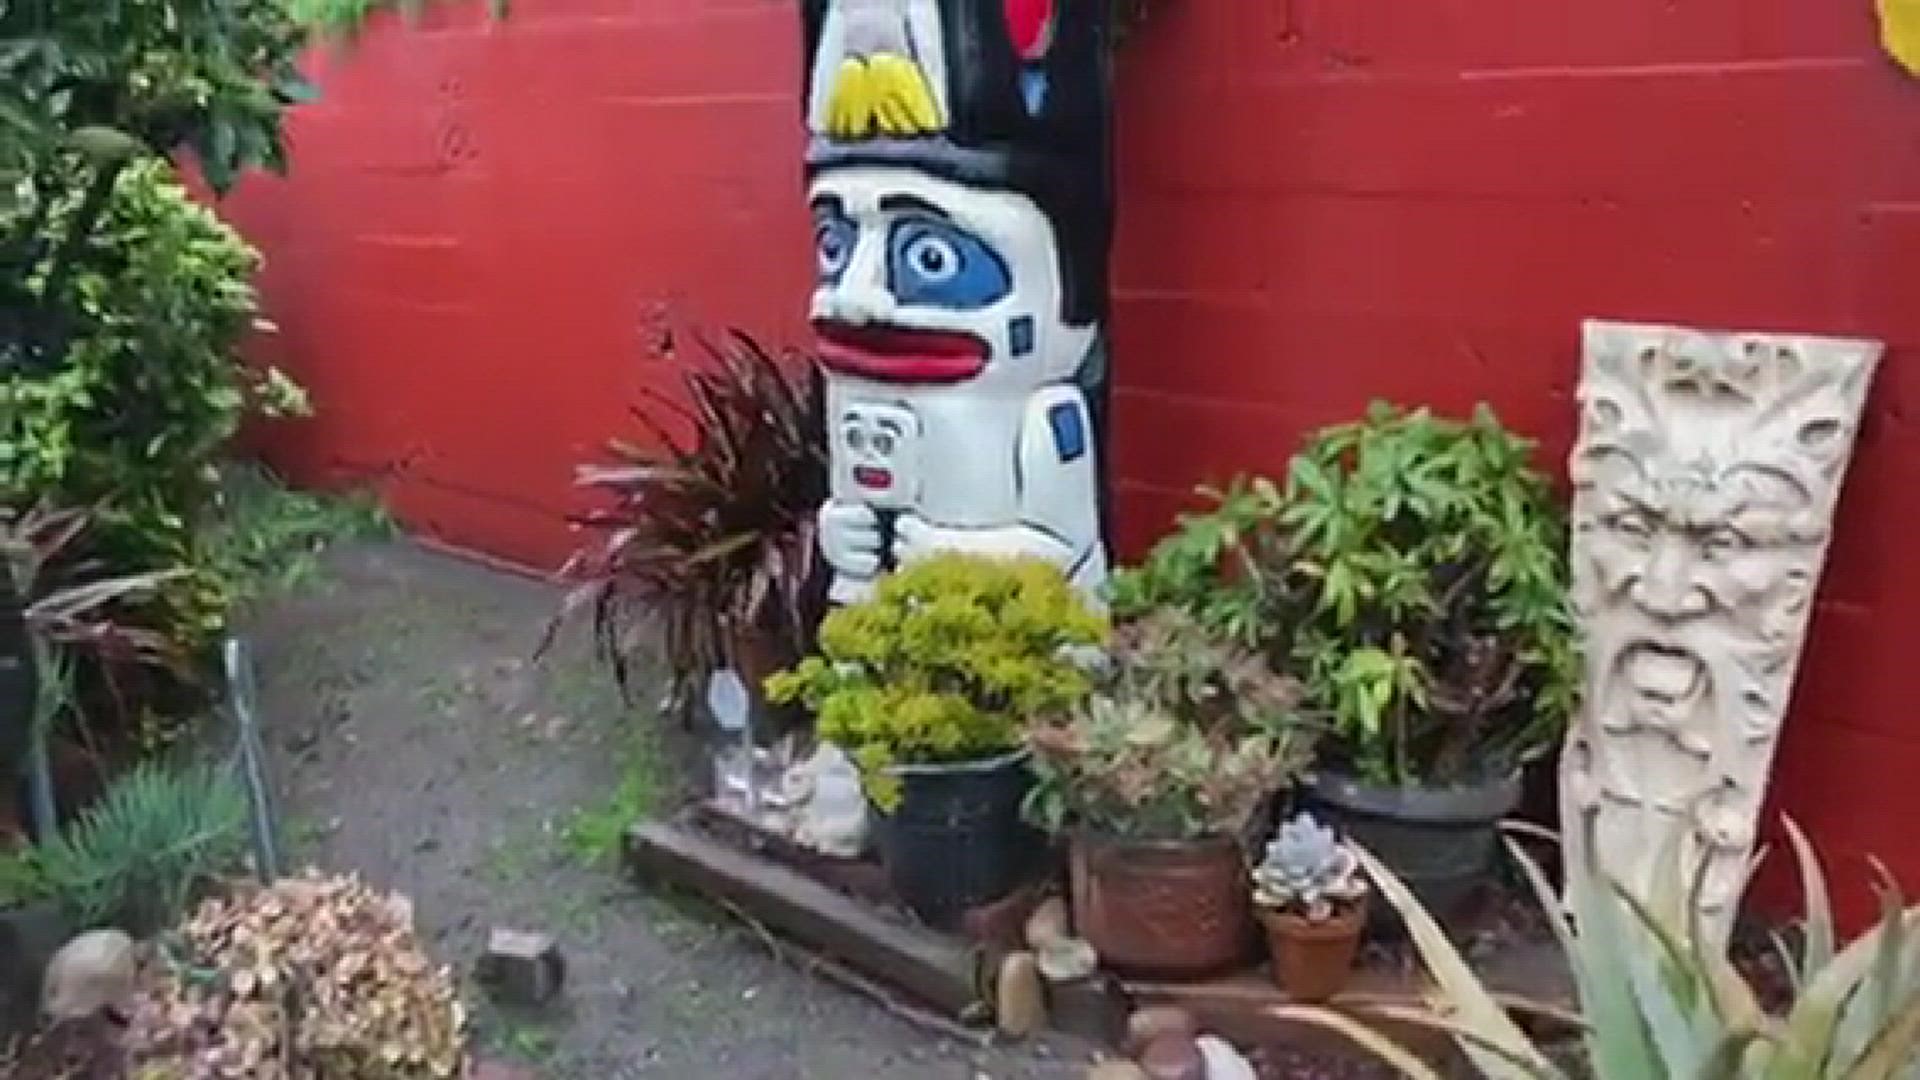 we asked our mystical backyard totem for a much needed rainy winter and this is what we got! Thanks Mr. Tote!
Credit: Bob Couey